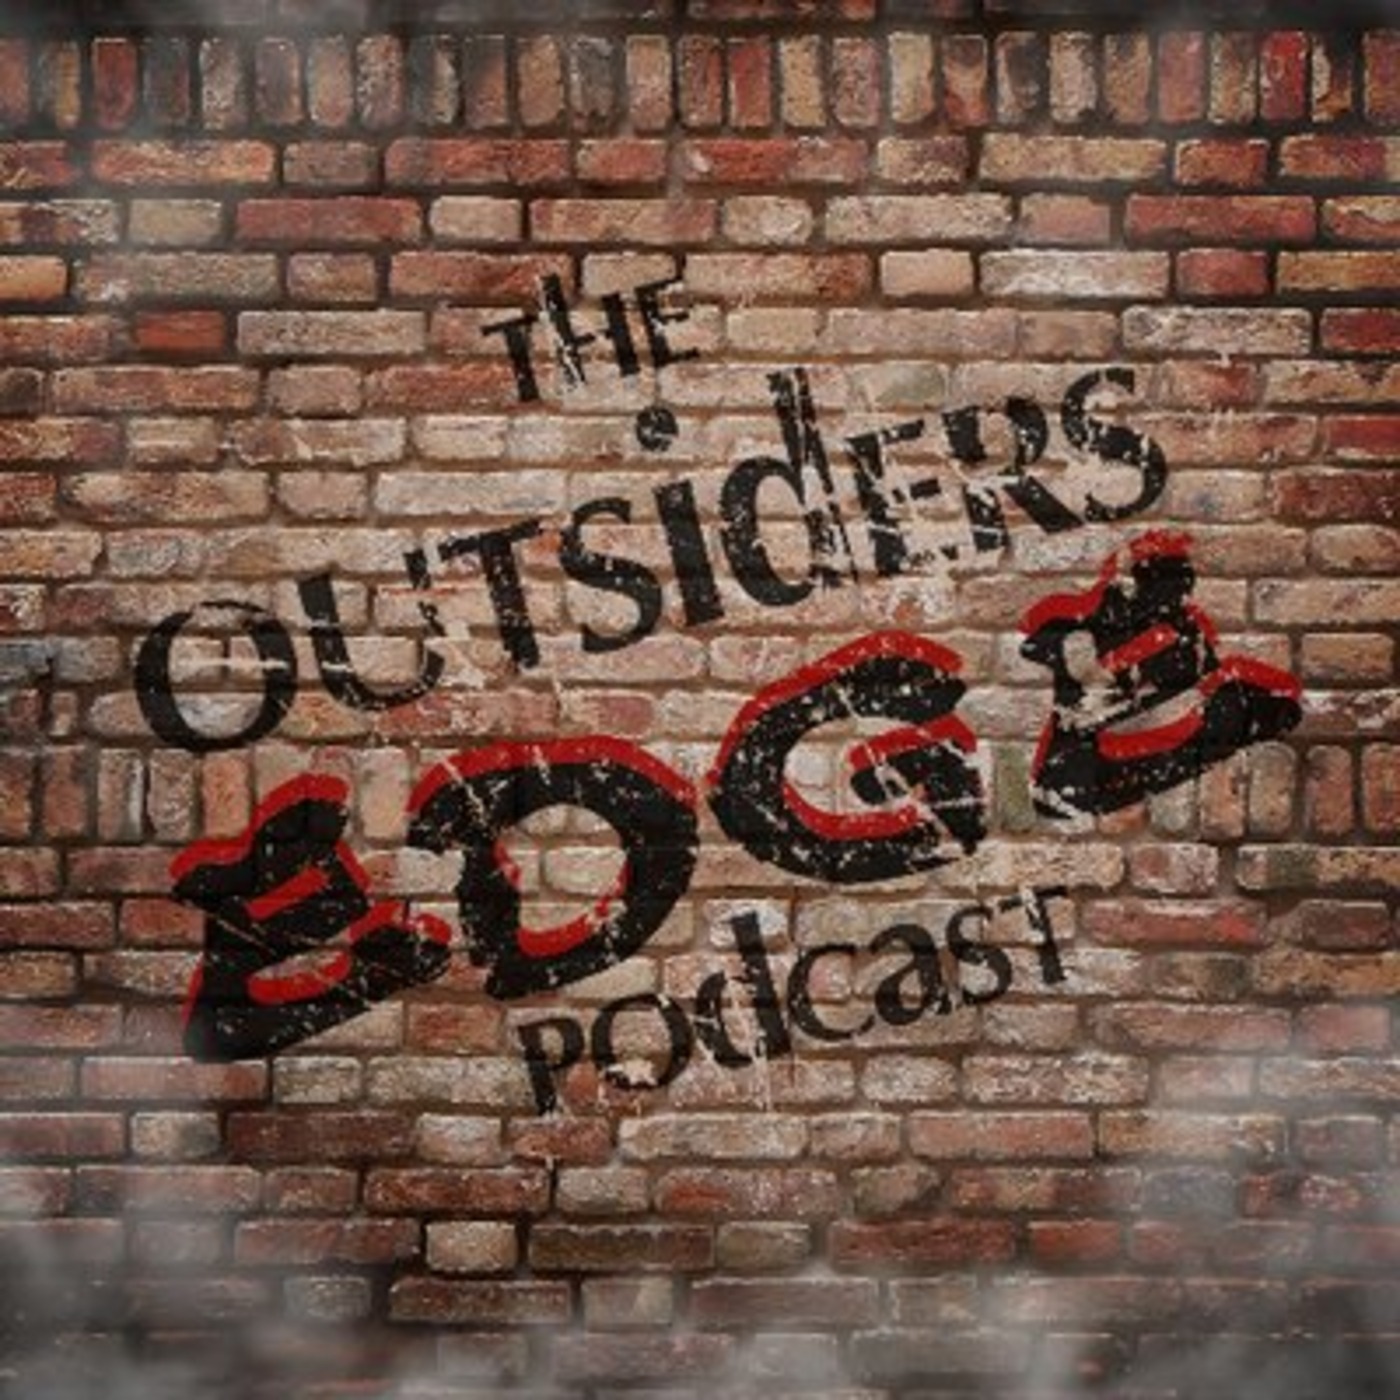 The Outsider's Edge presents The Out Of Retirement Episode